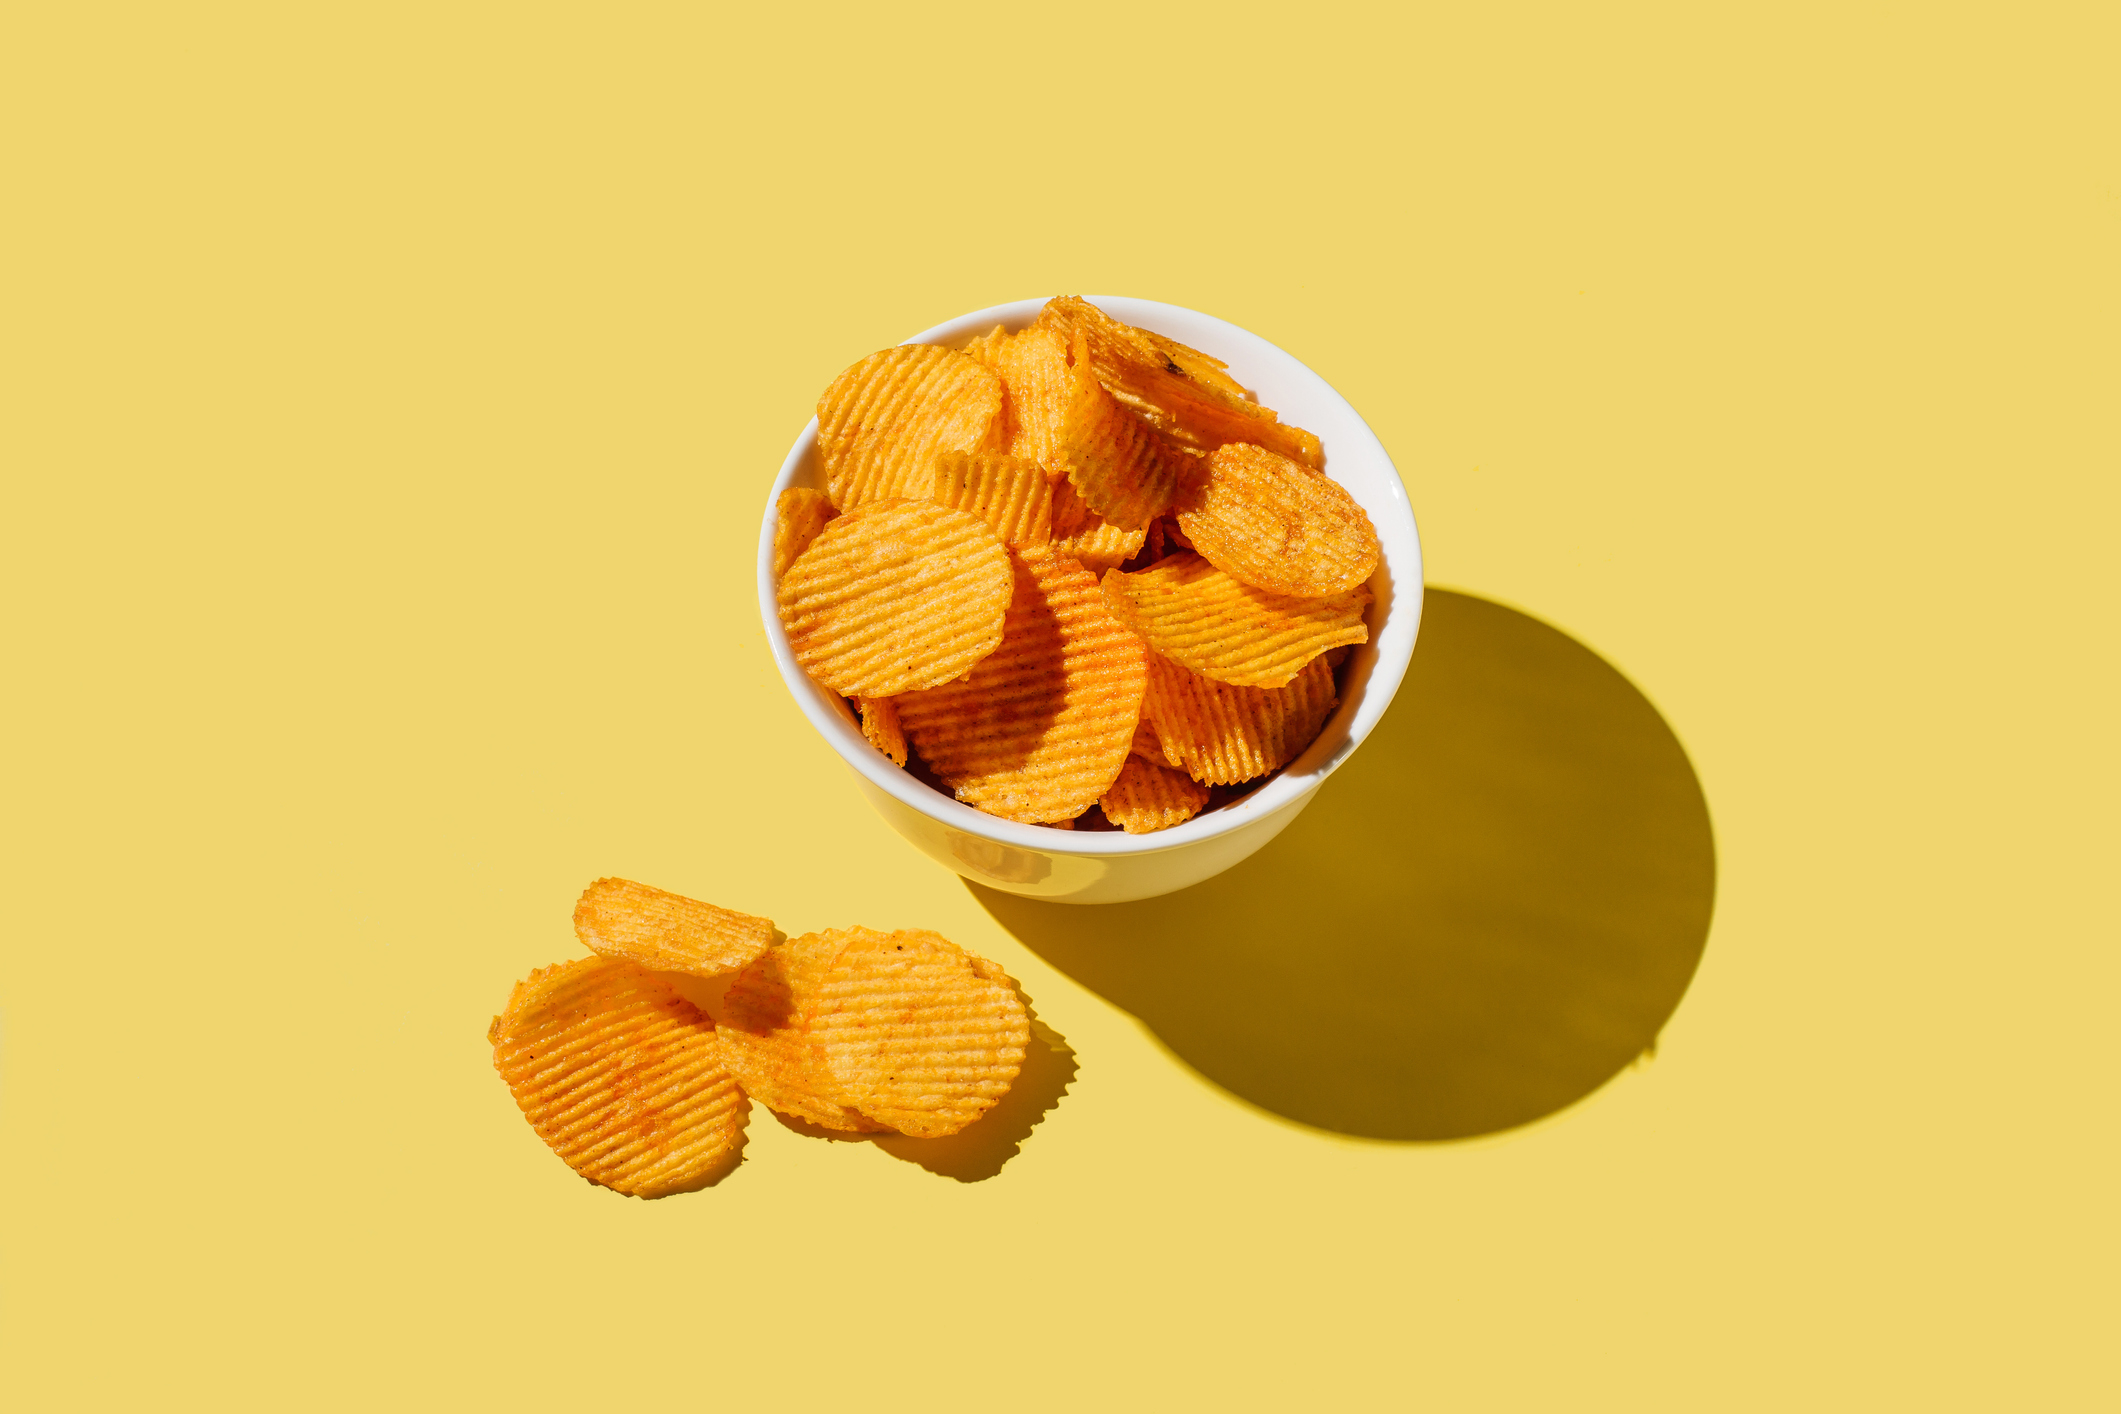 Plate of potato chips on yellow background